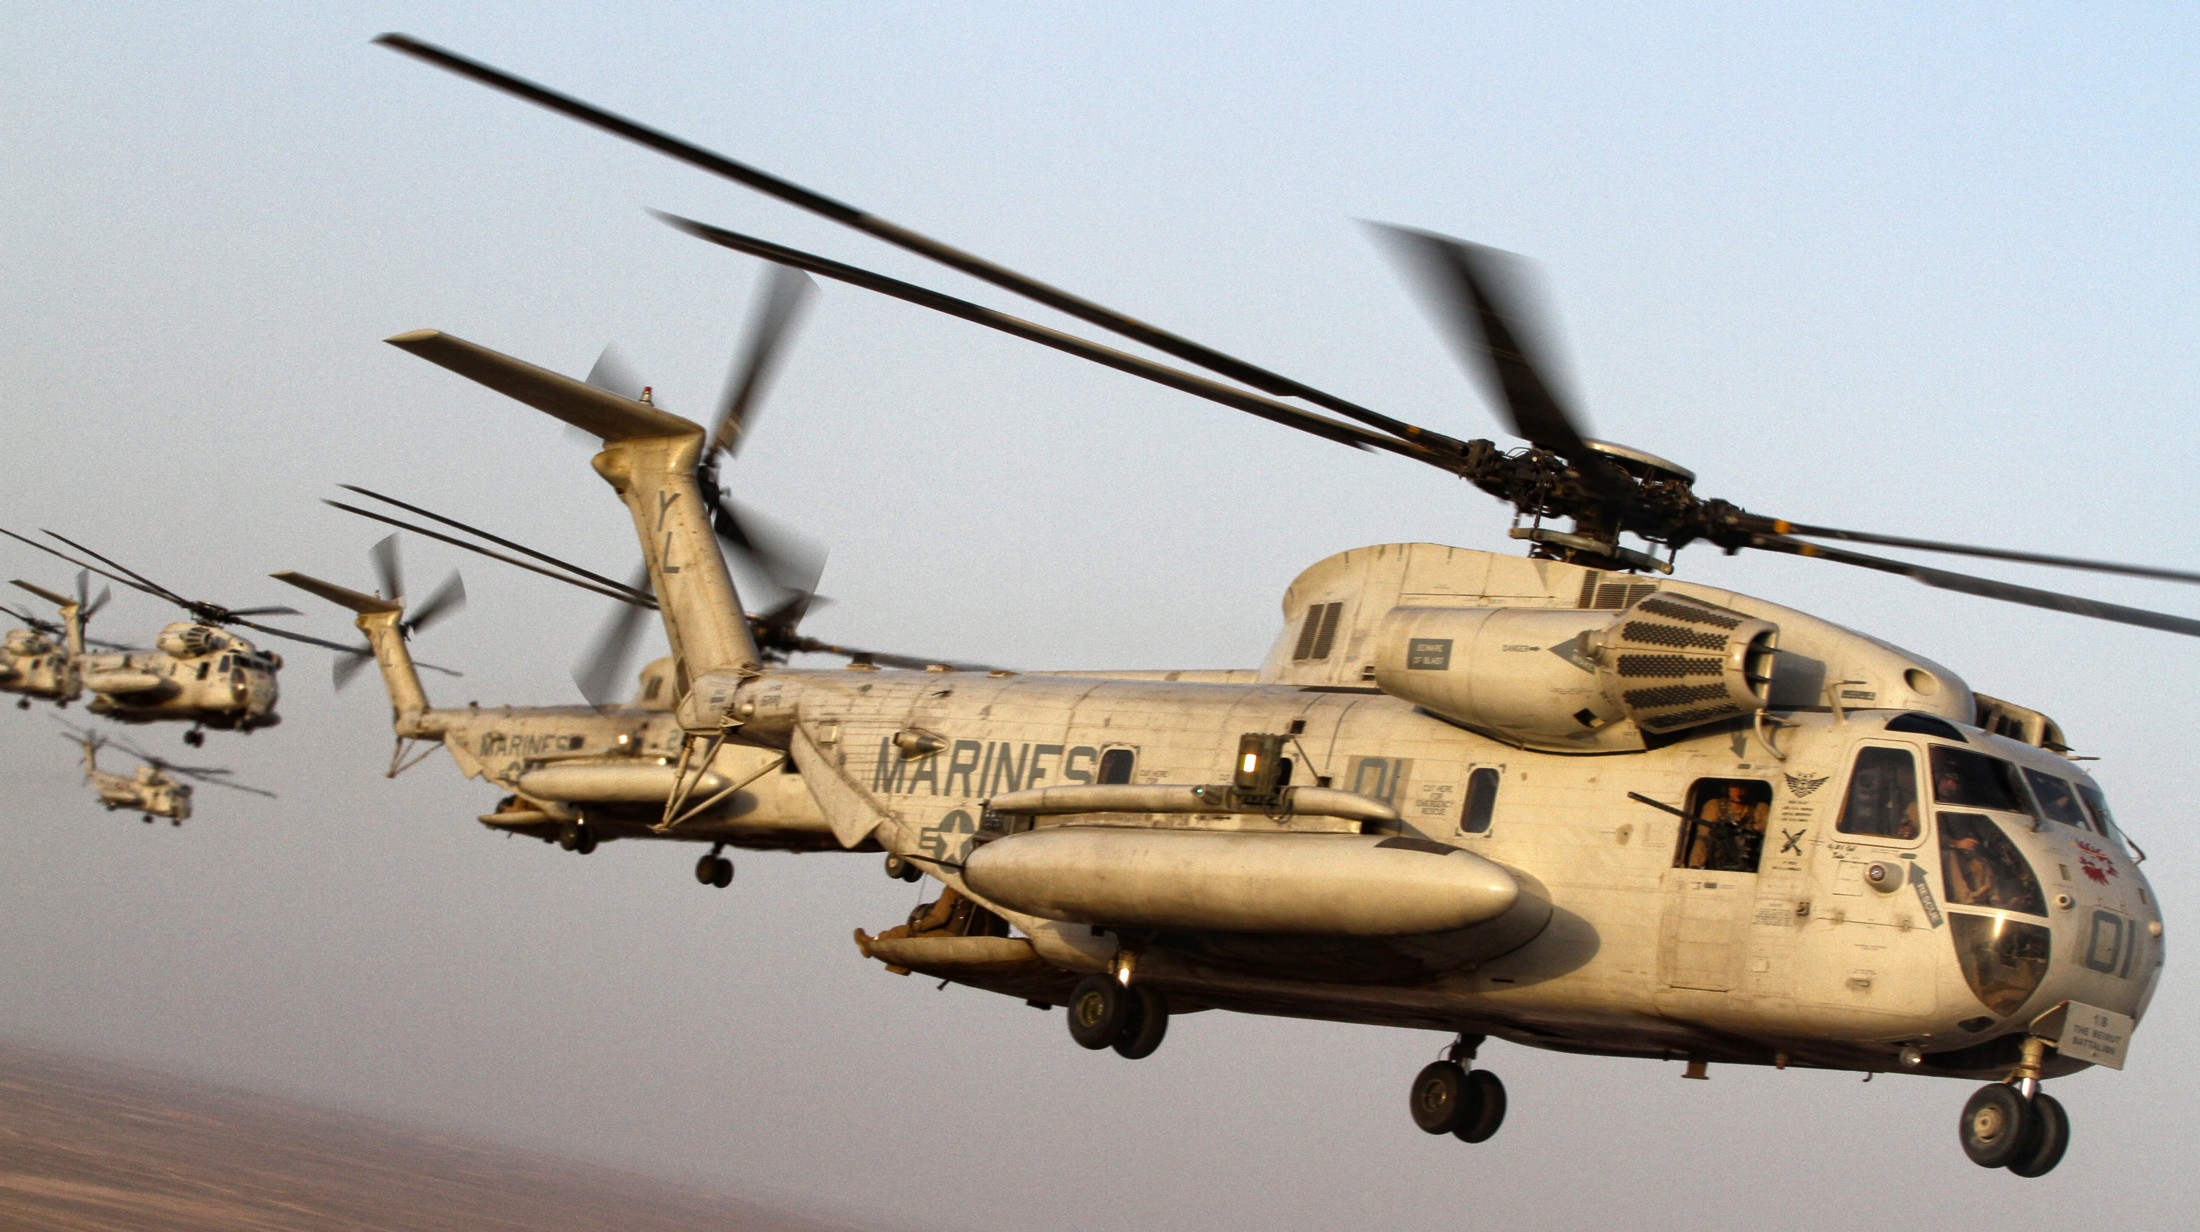 hmh-362 ugly angels marine heavy helicopter squadron usmc sikorsky ch-53d sea stallion helmand province